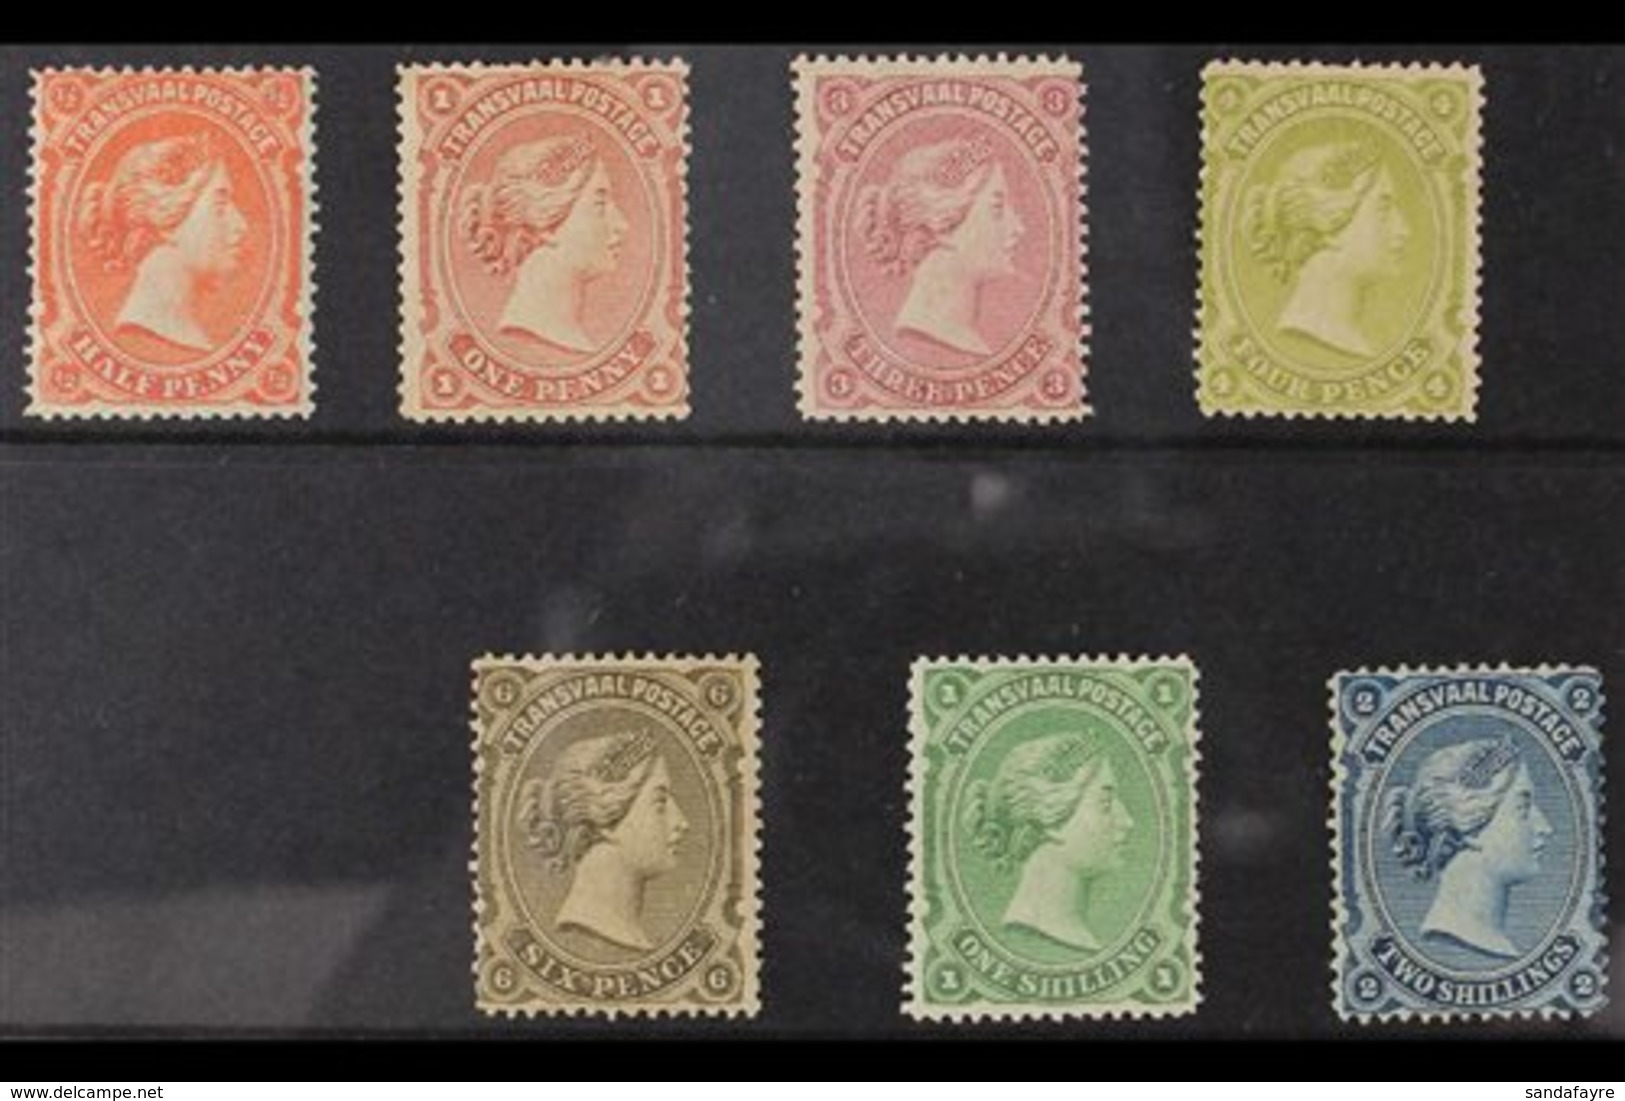 TRANSVAAL 1878 Queen Victoria Set Complete, SG 133/9, Very Fine And Fresh Mint. Lovely Bright Colours. (7 Stamps) For Mo - Unclassified